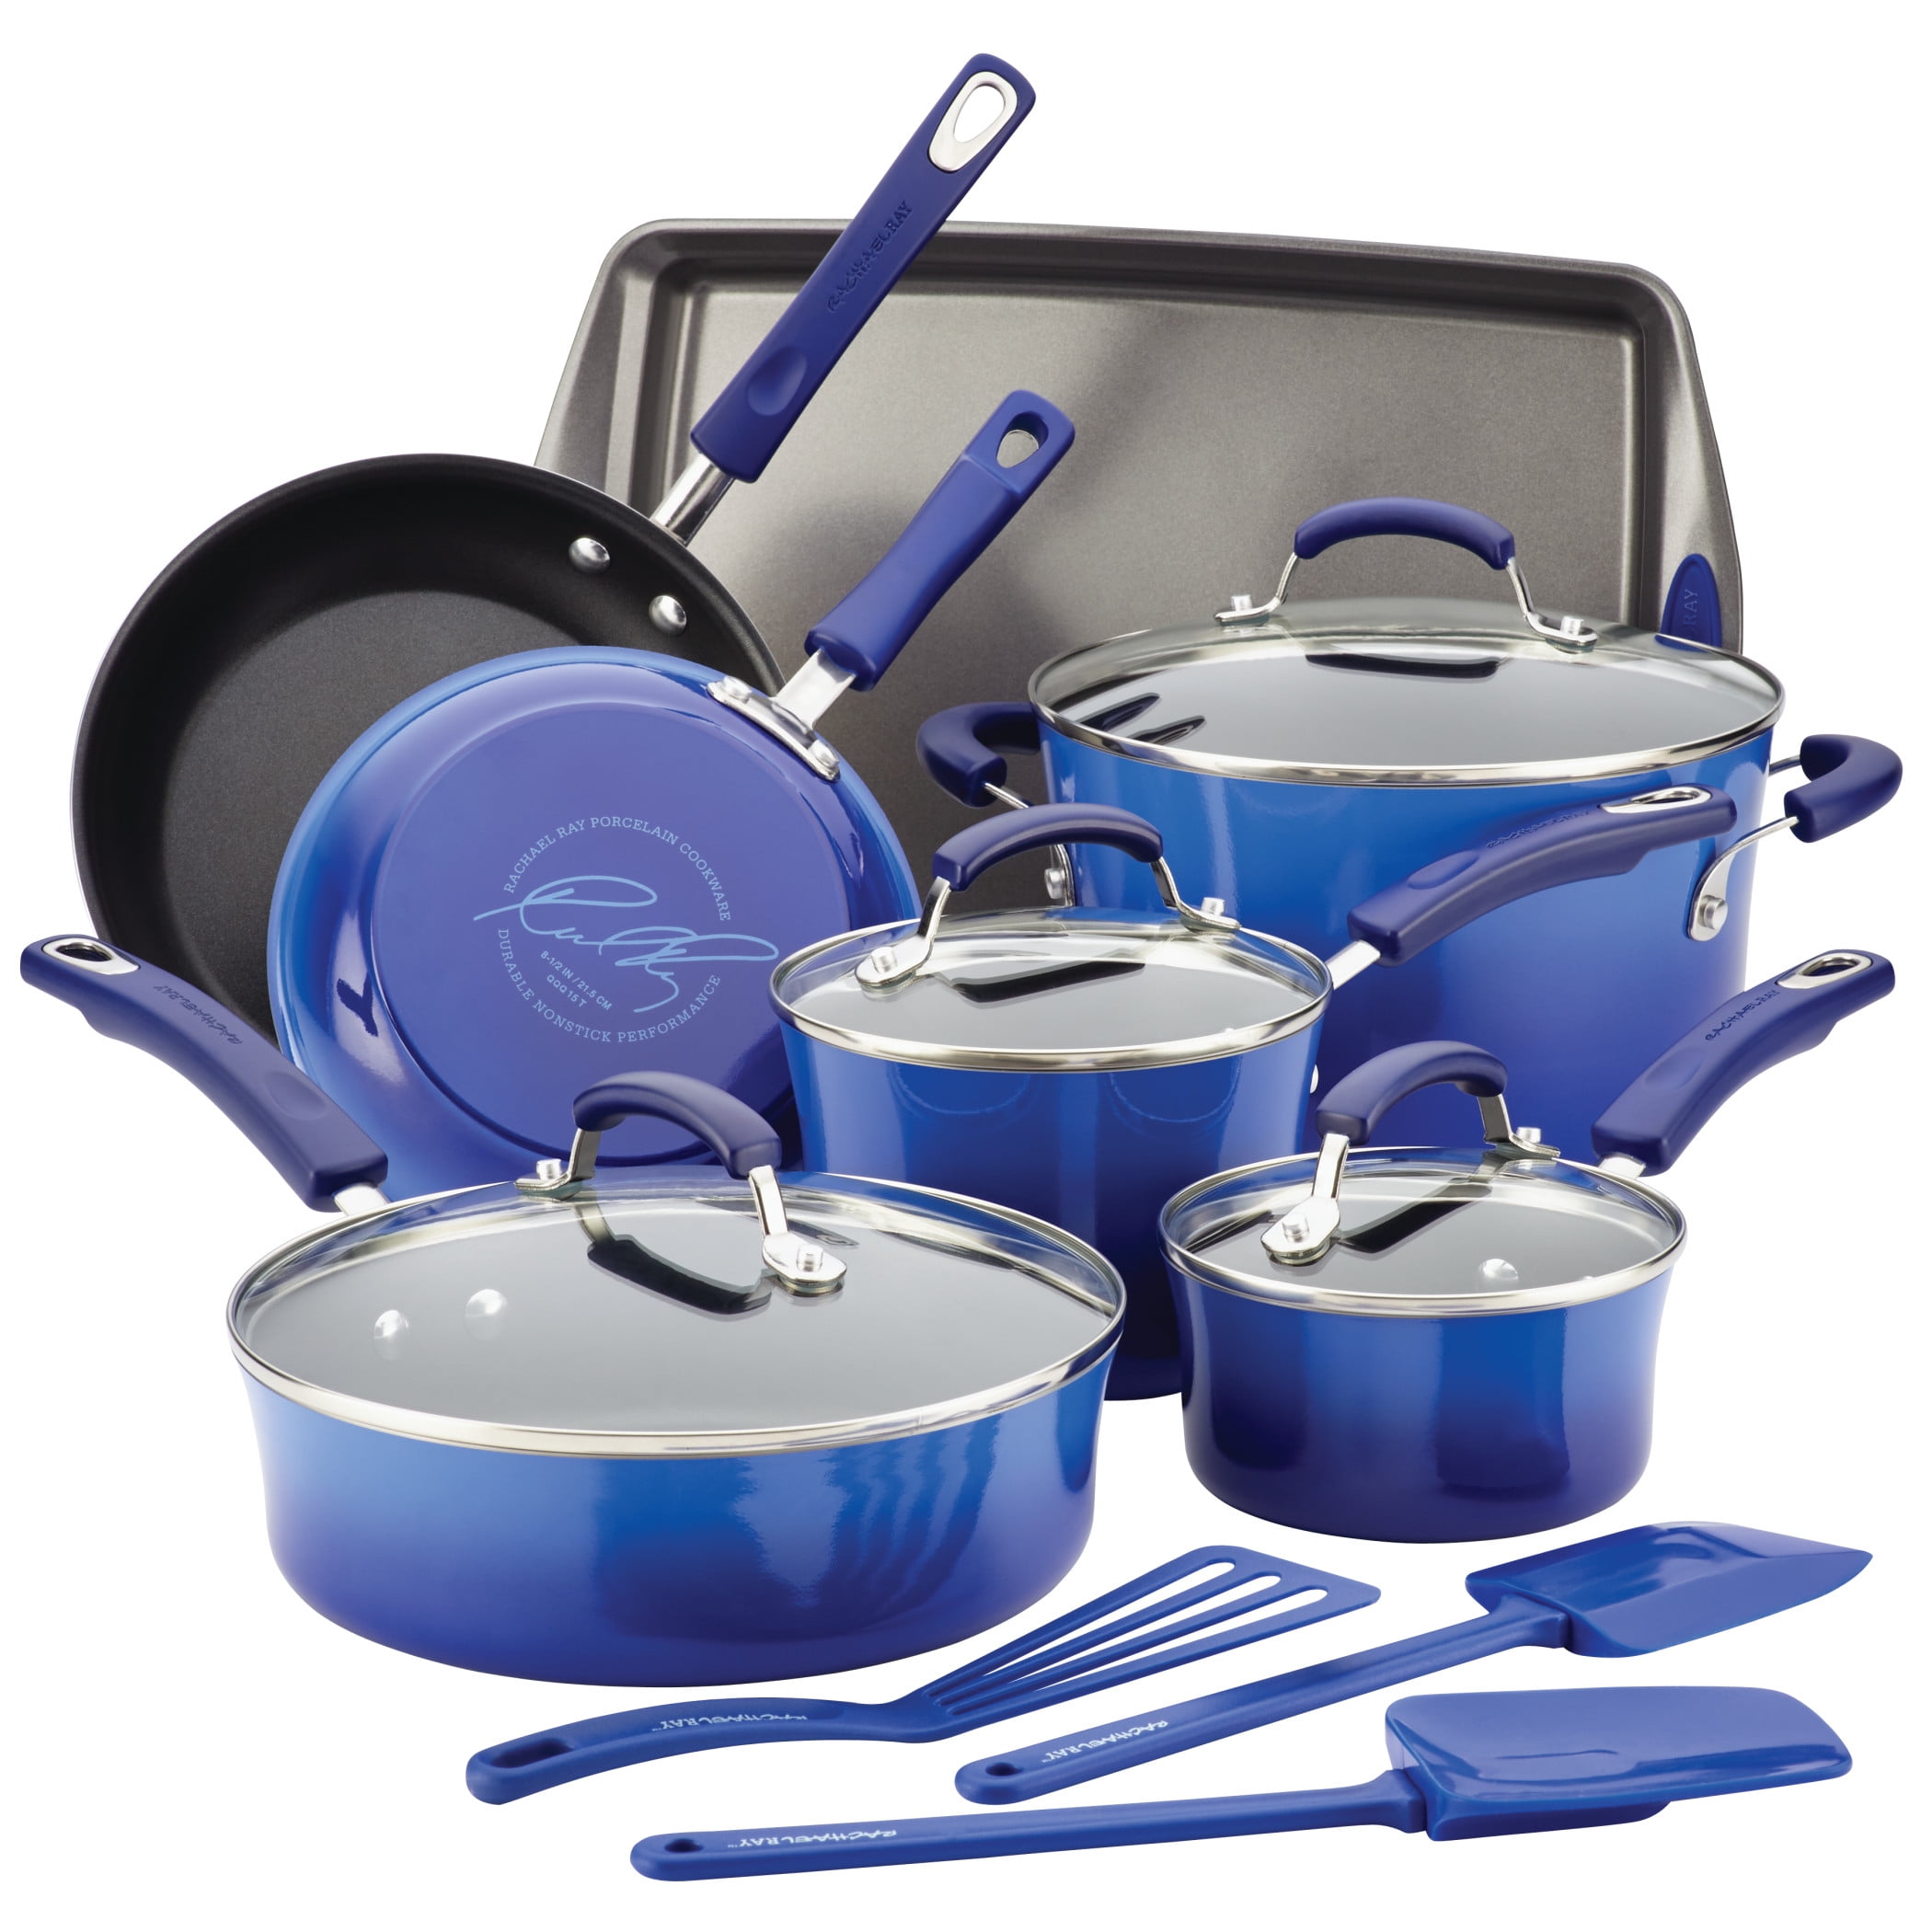 Rachael Ray Hard Enamel Cookware And Accessories 14 Piece Set Agave Blue